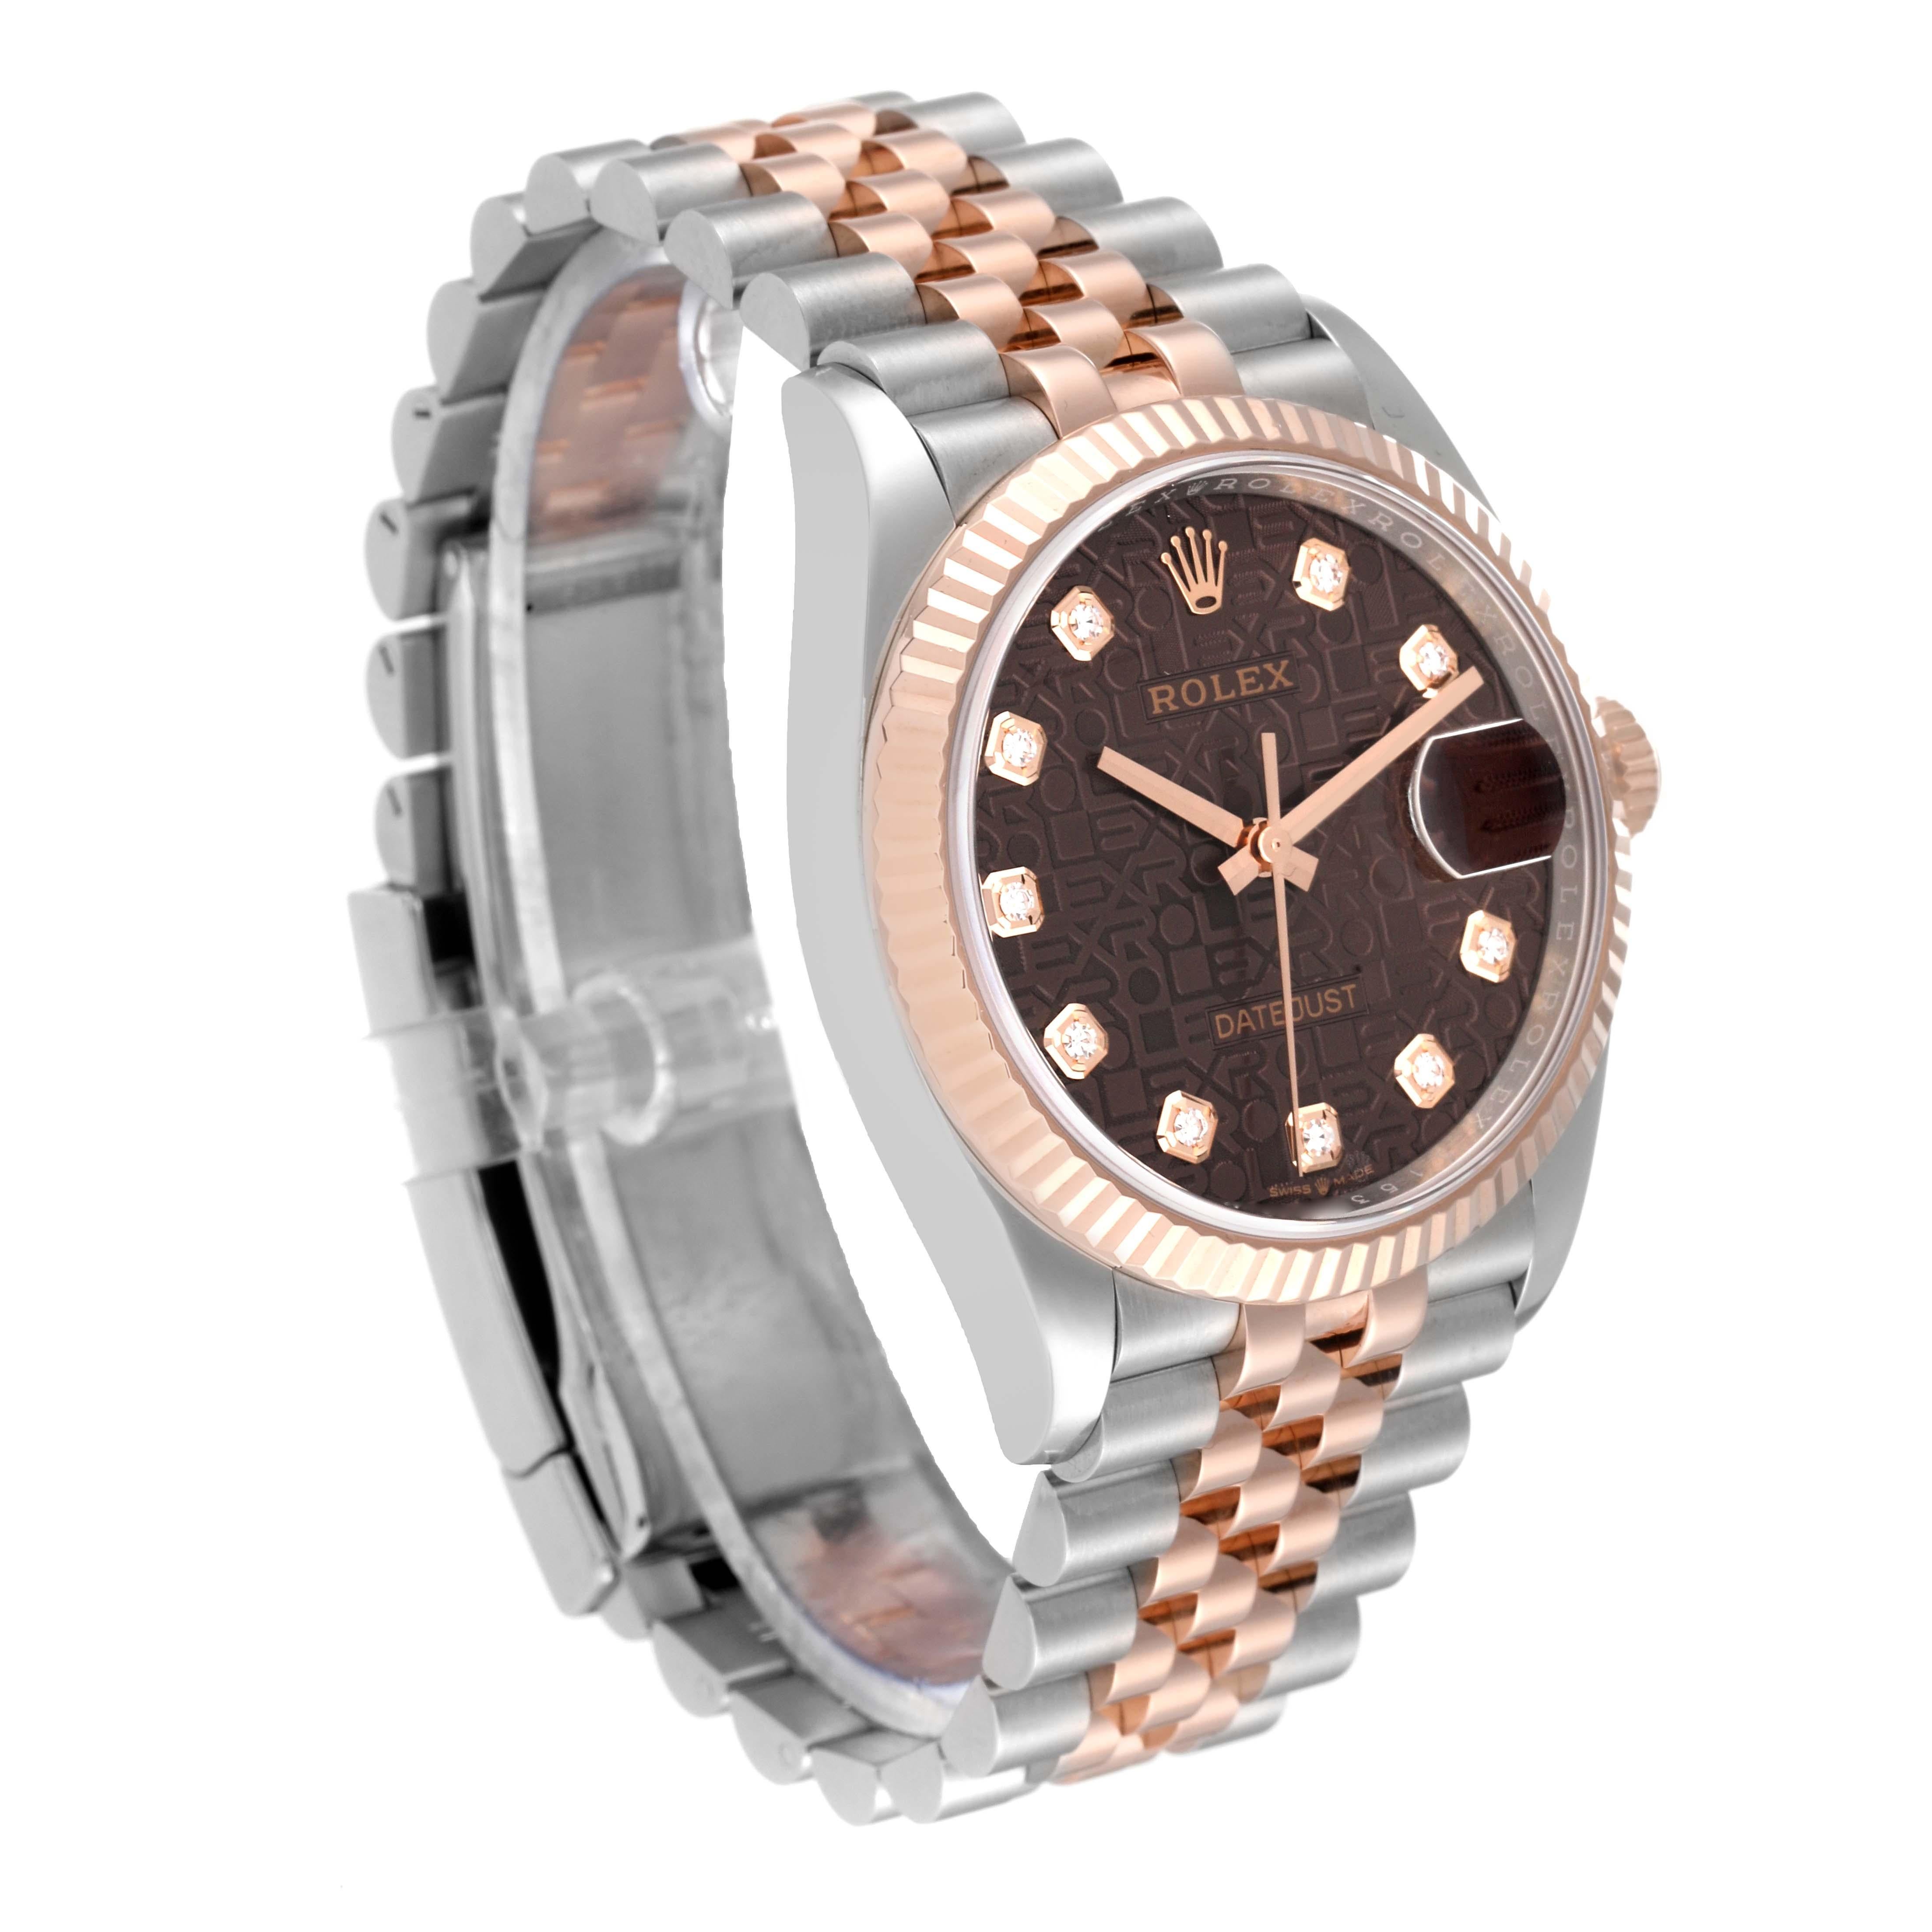 Rolex Datejust Chocolate Anniversary Steel Rose Gold Diamond Mens Watch 126231 In Excellent Condition For Sale In Atlanta, GA